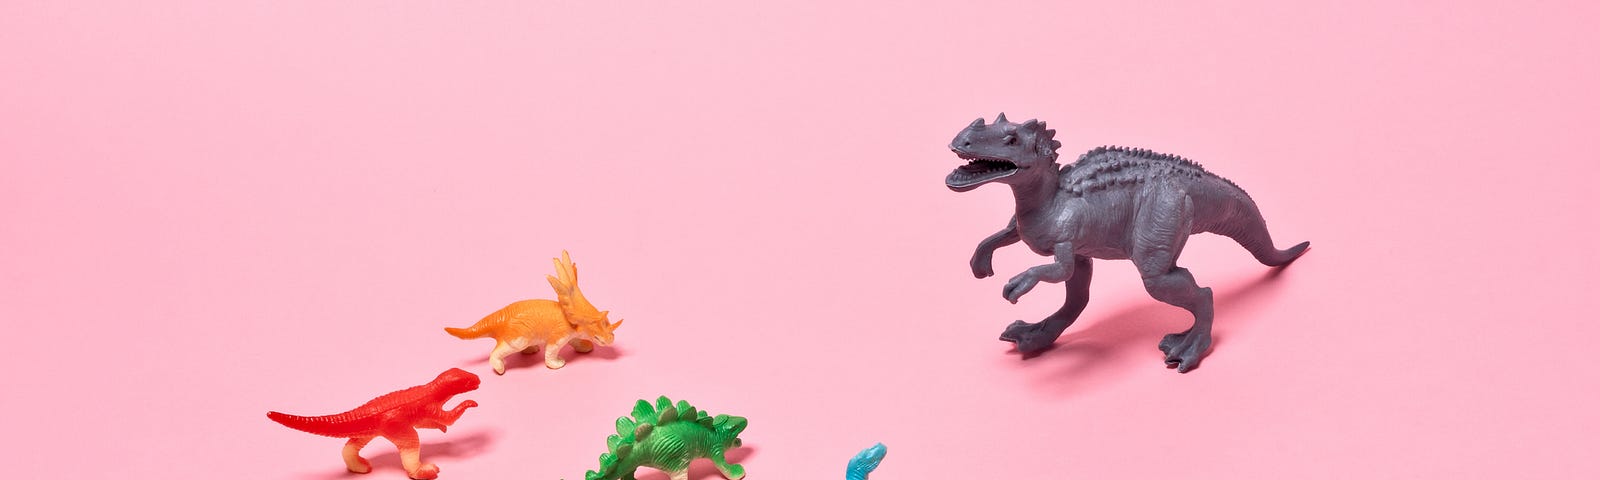 A photo of smaller dinosaur figurines in front of a T-rex figurine.